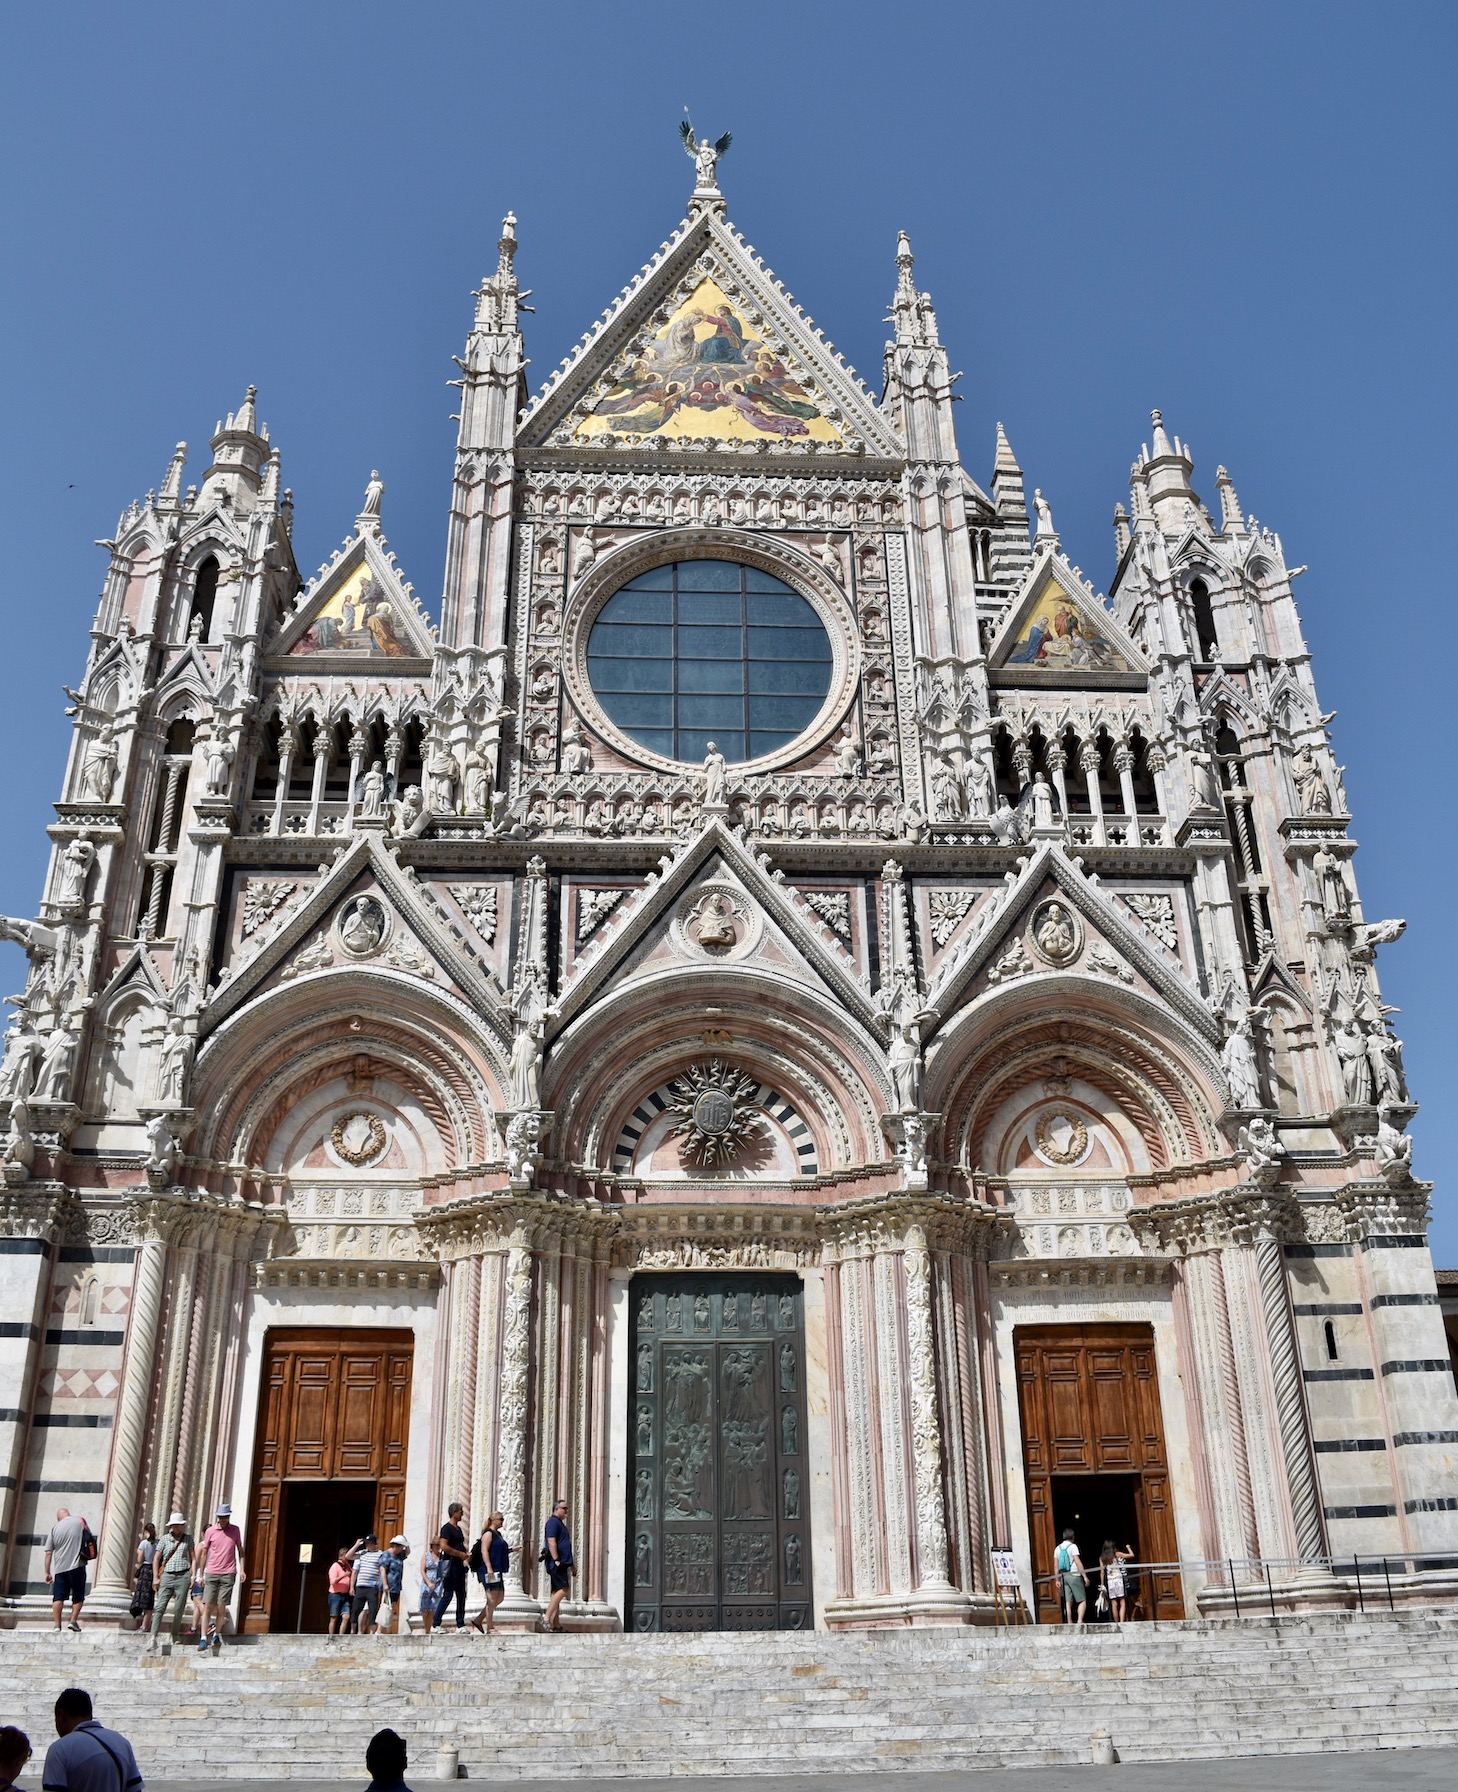 The incredibly ornate facade of the Santa Maria Assunta Cathedral in Siena 